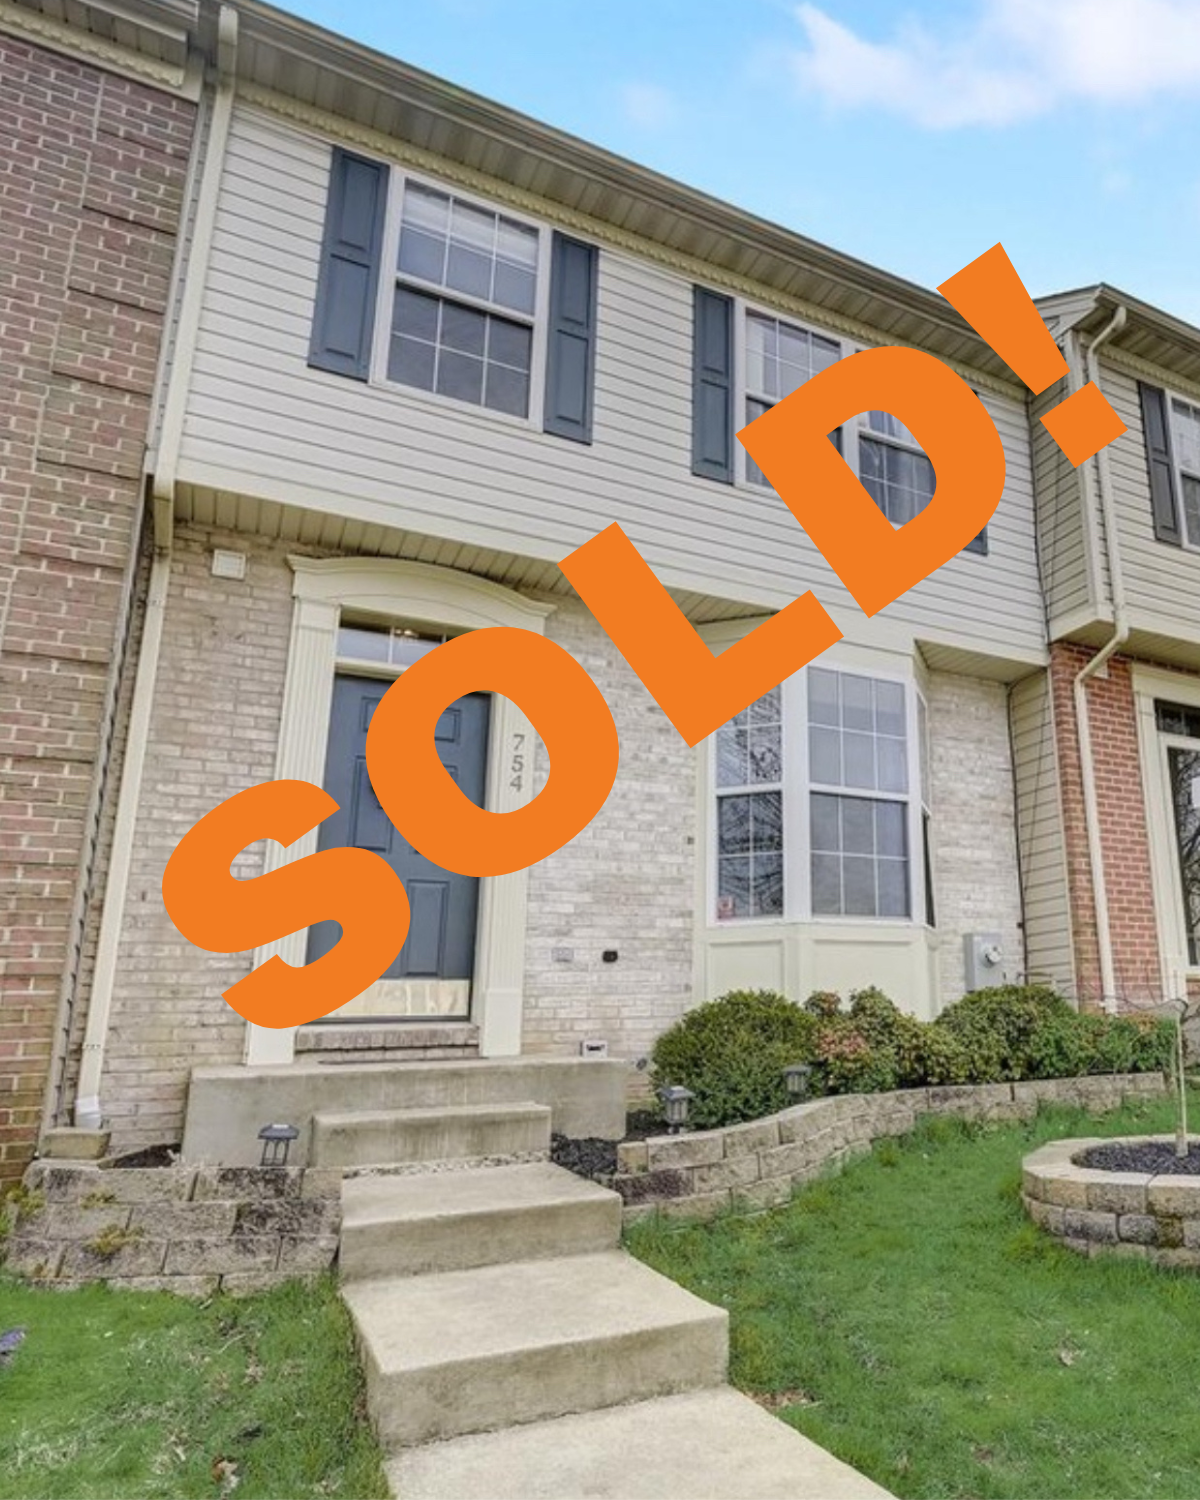 754 W Hickory Limb Circle In Bel Air Maryland Has SOLD